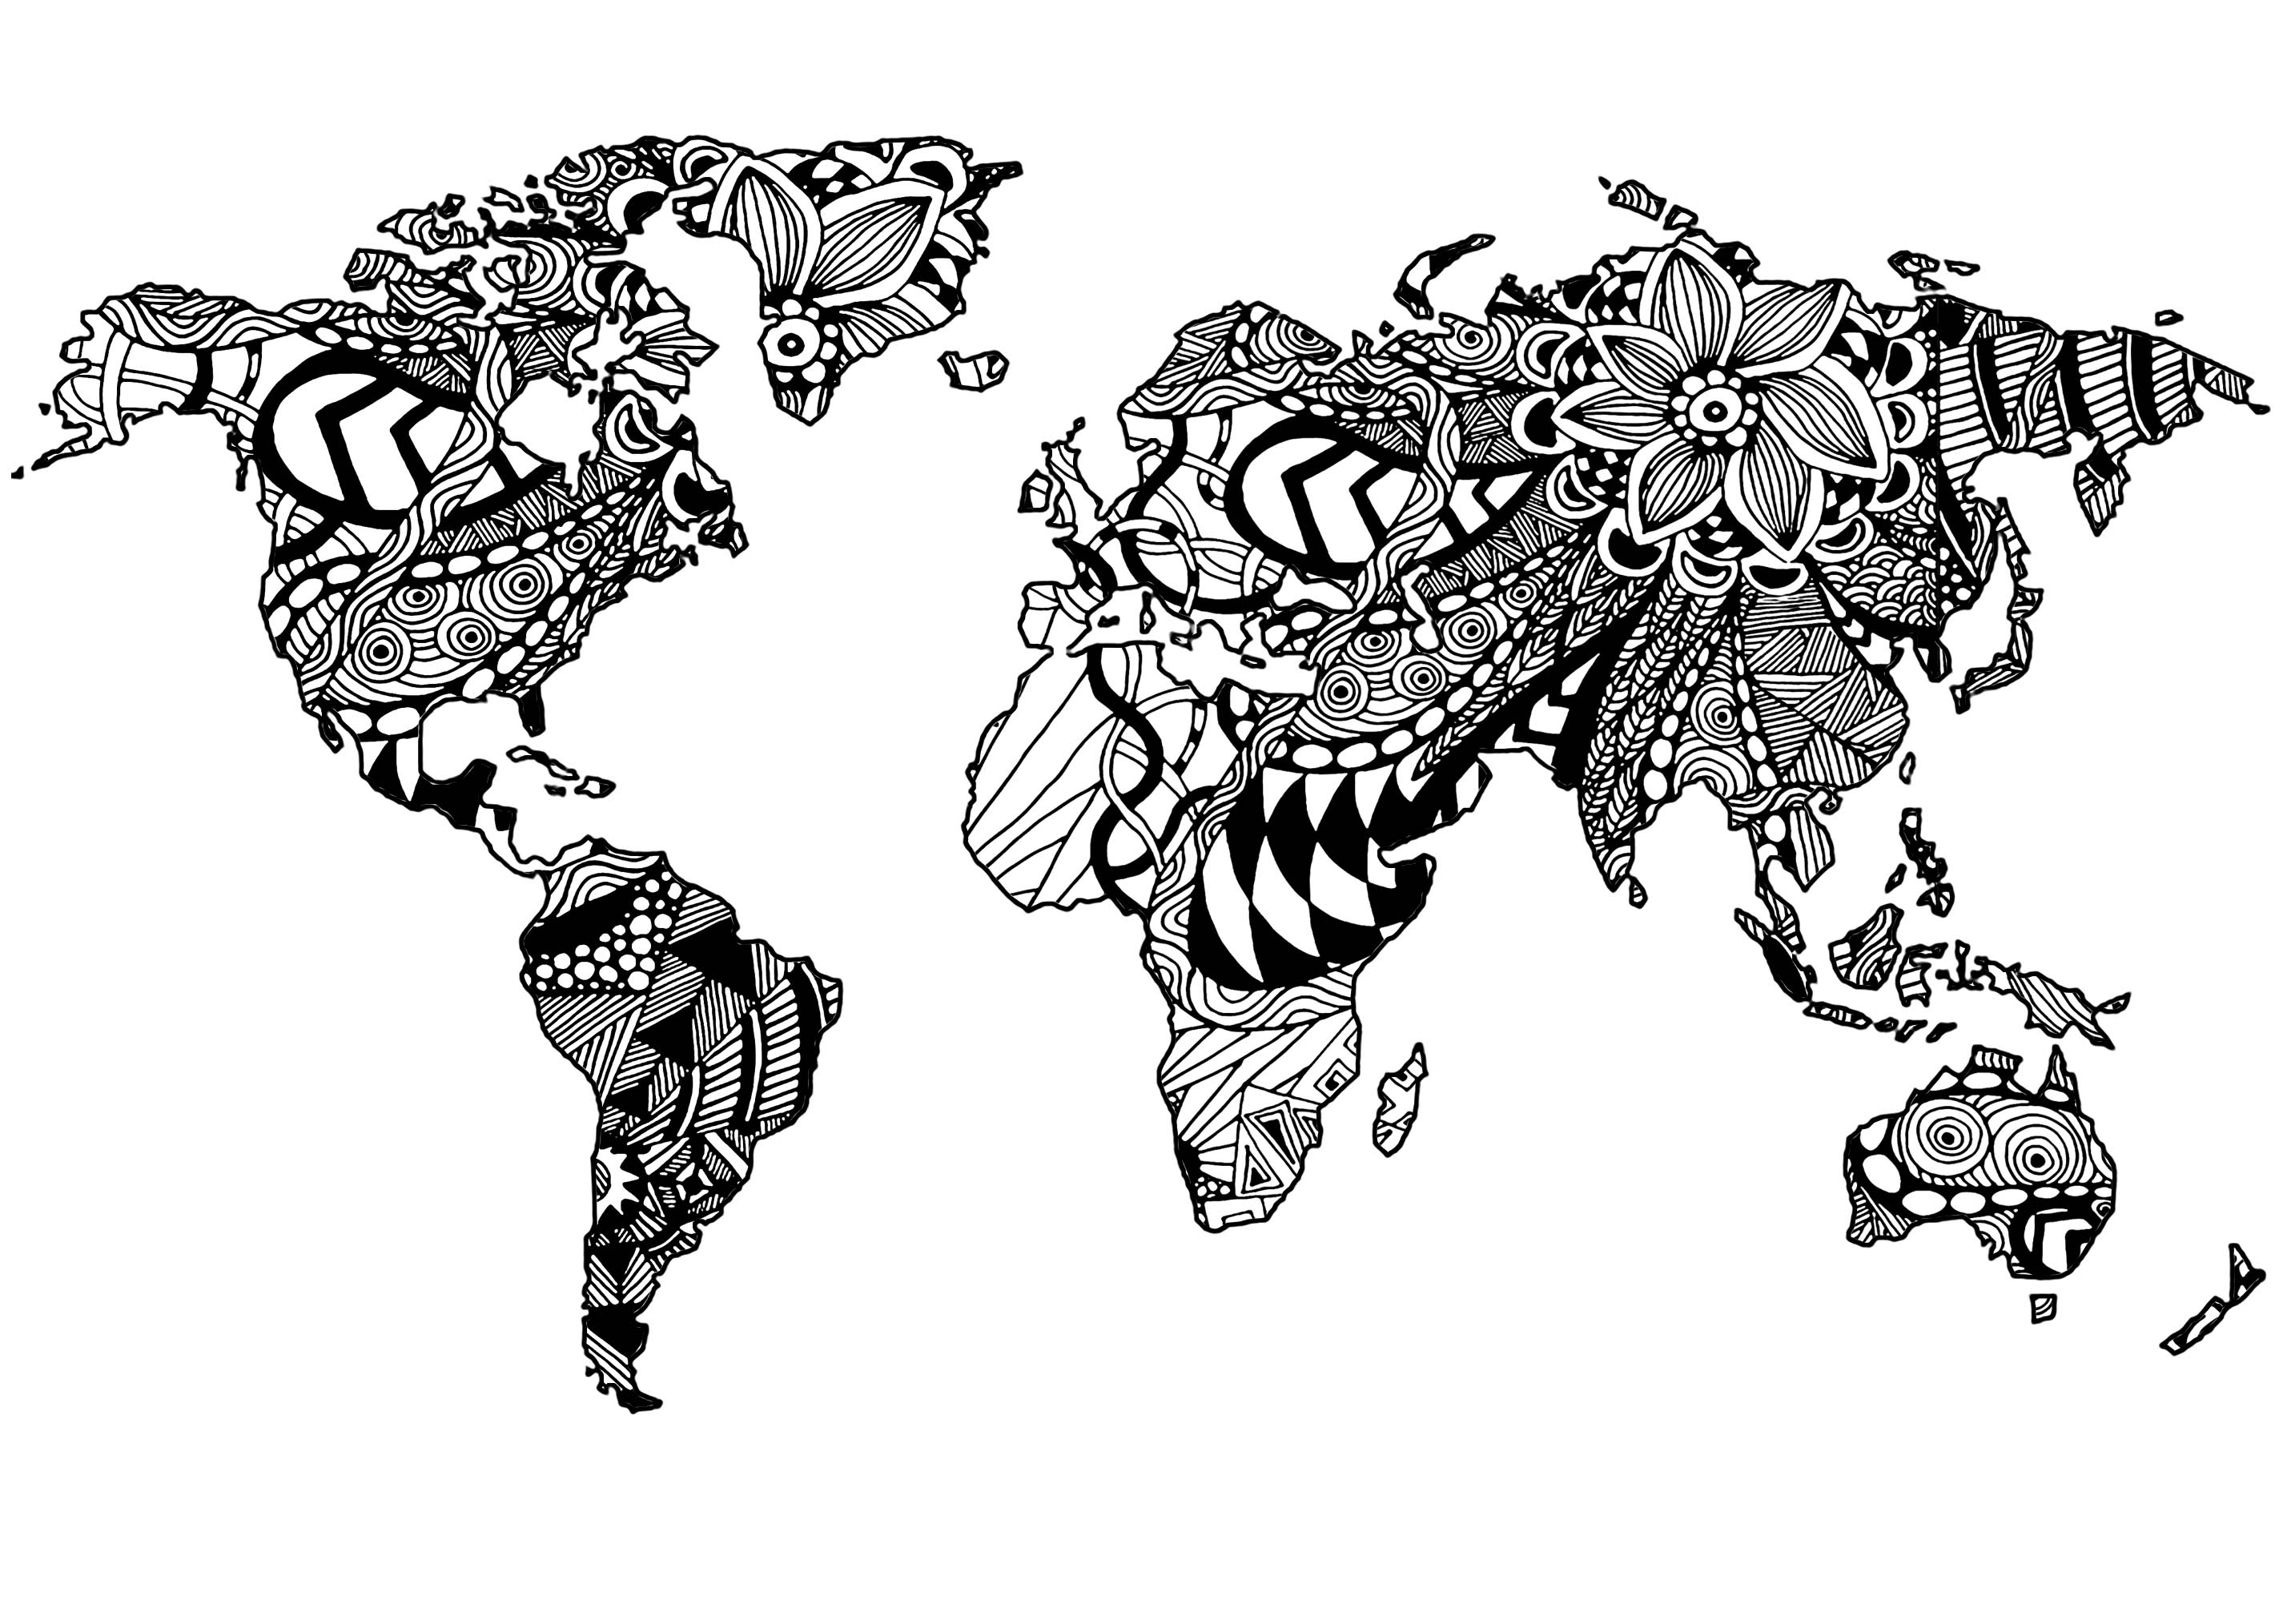 Our planet Earth and its continents, with complex Zentangle patterns inside the lands